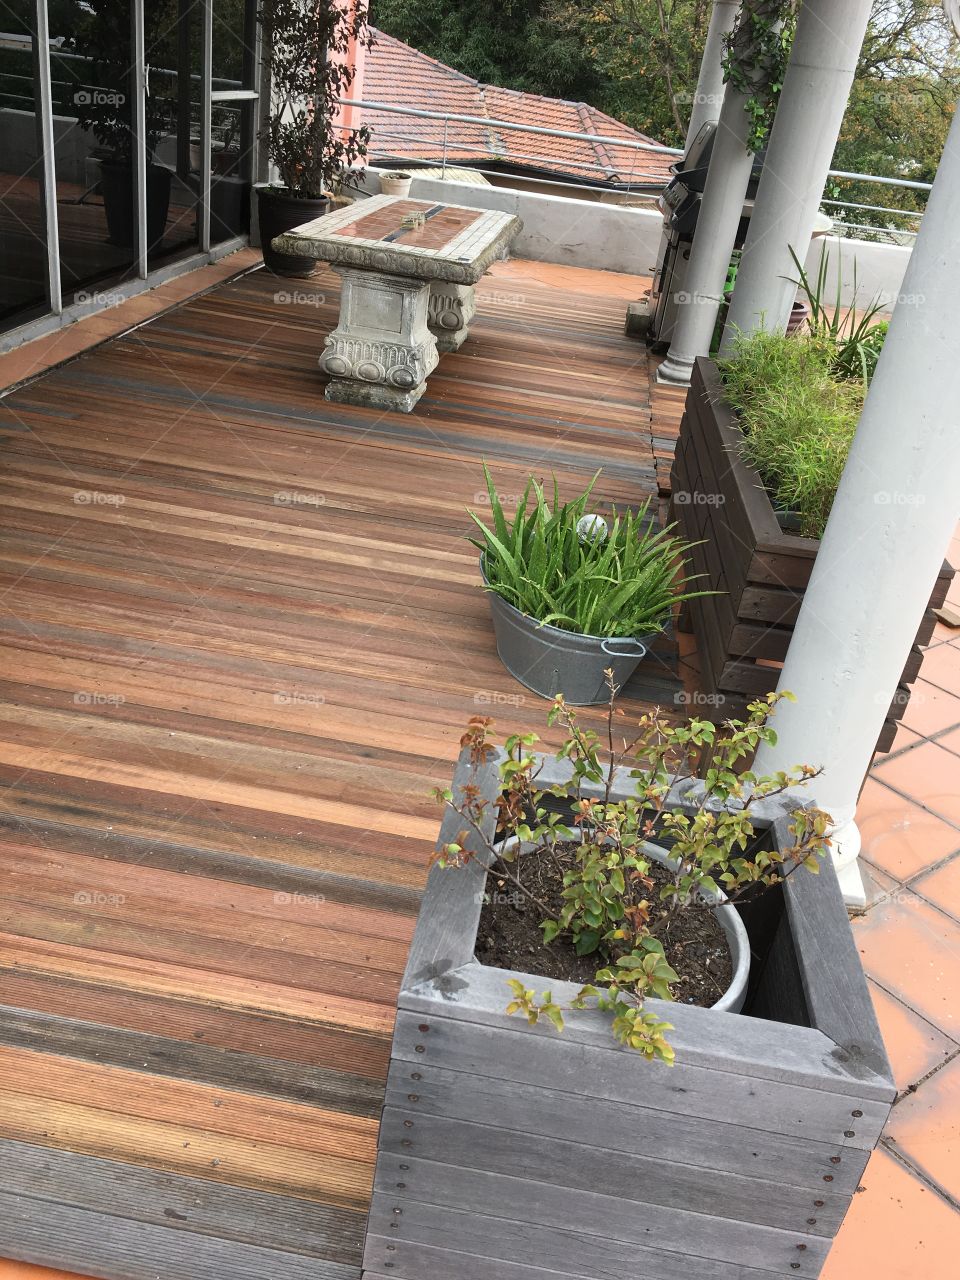 The reclaimed deck
